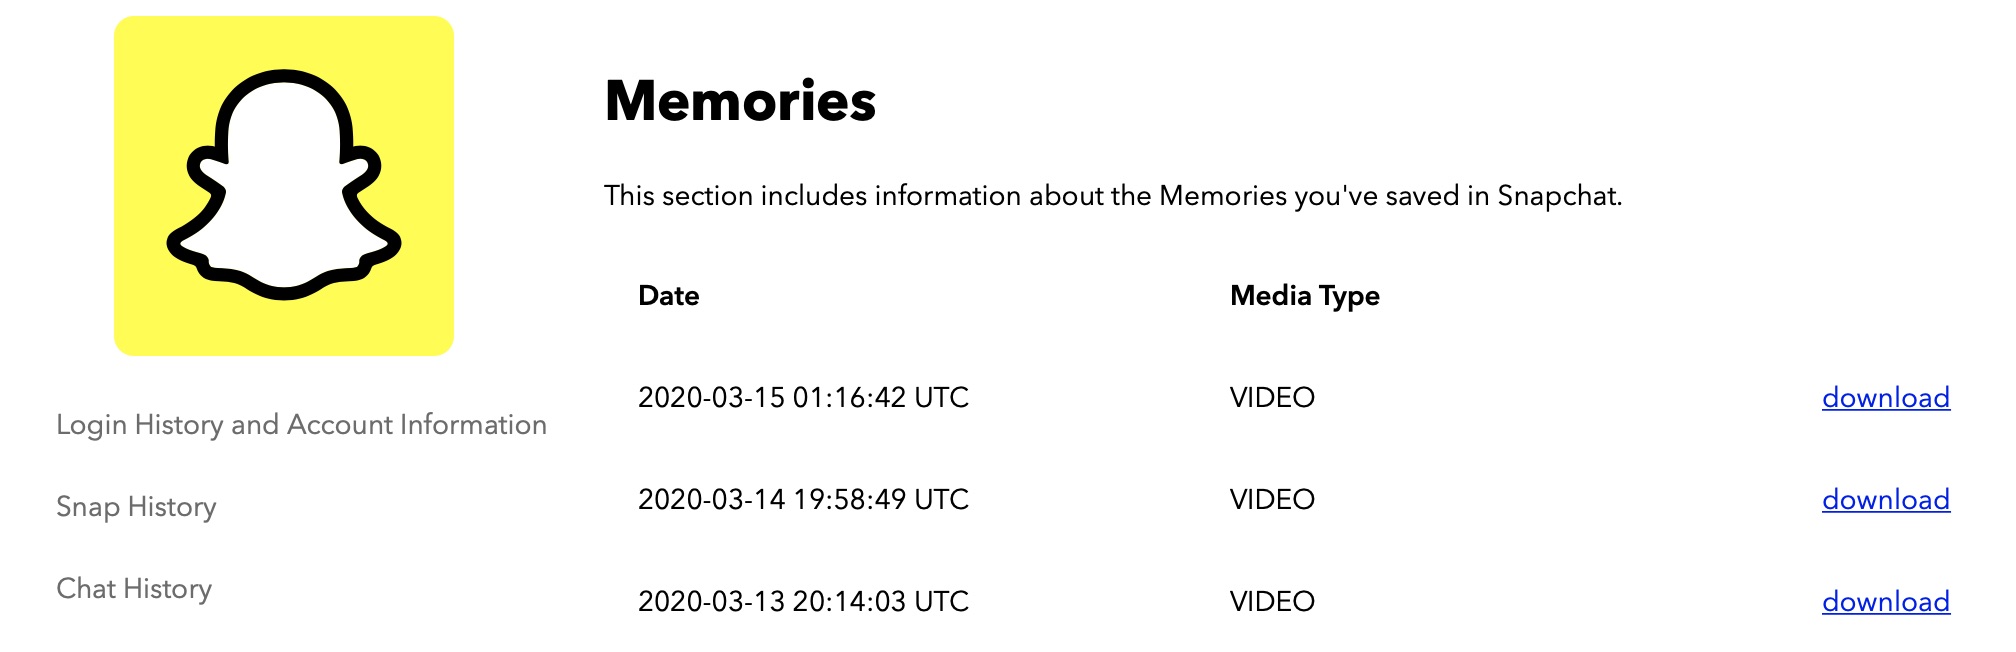 how-to-download-memories-from-snapchat-data